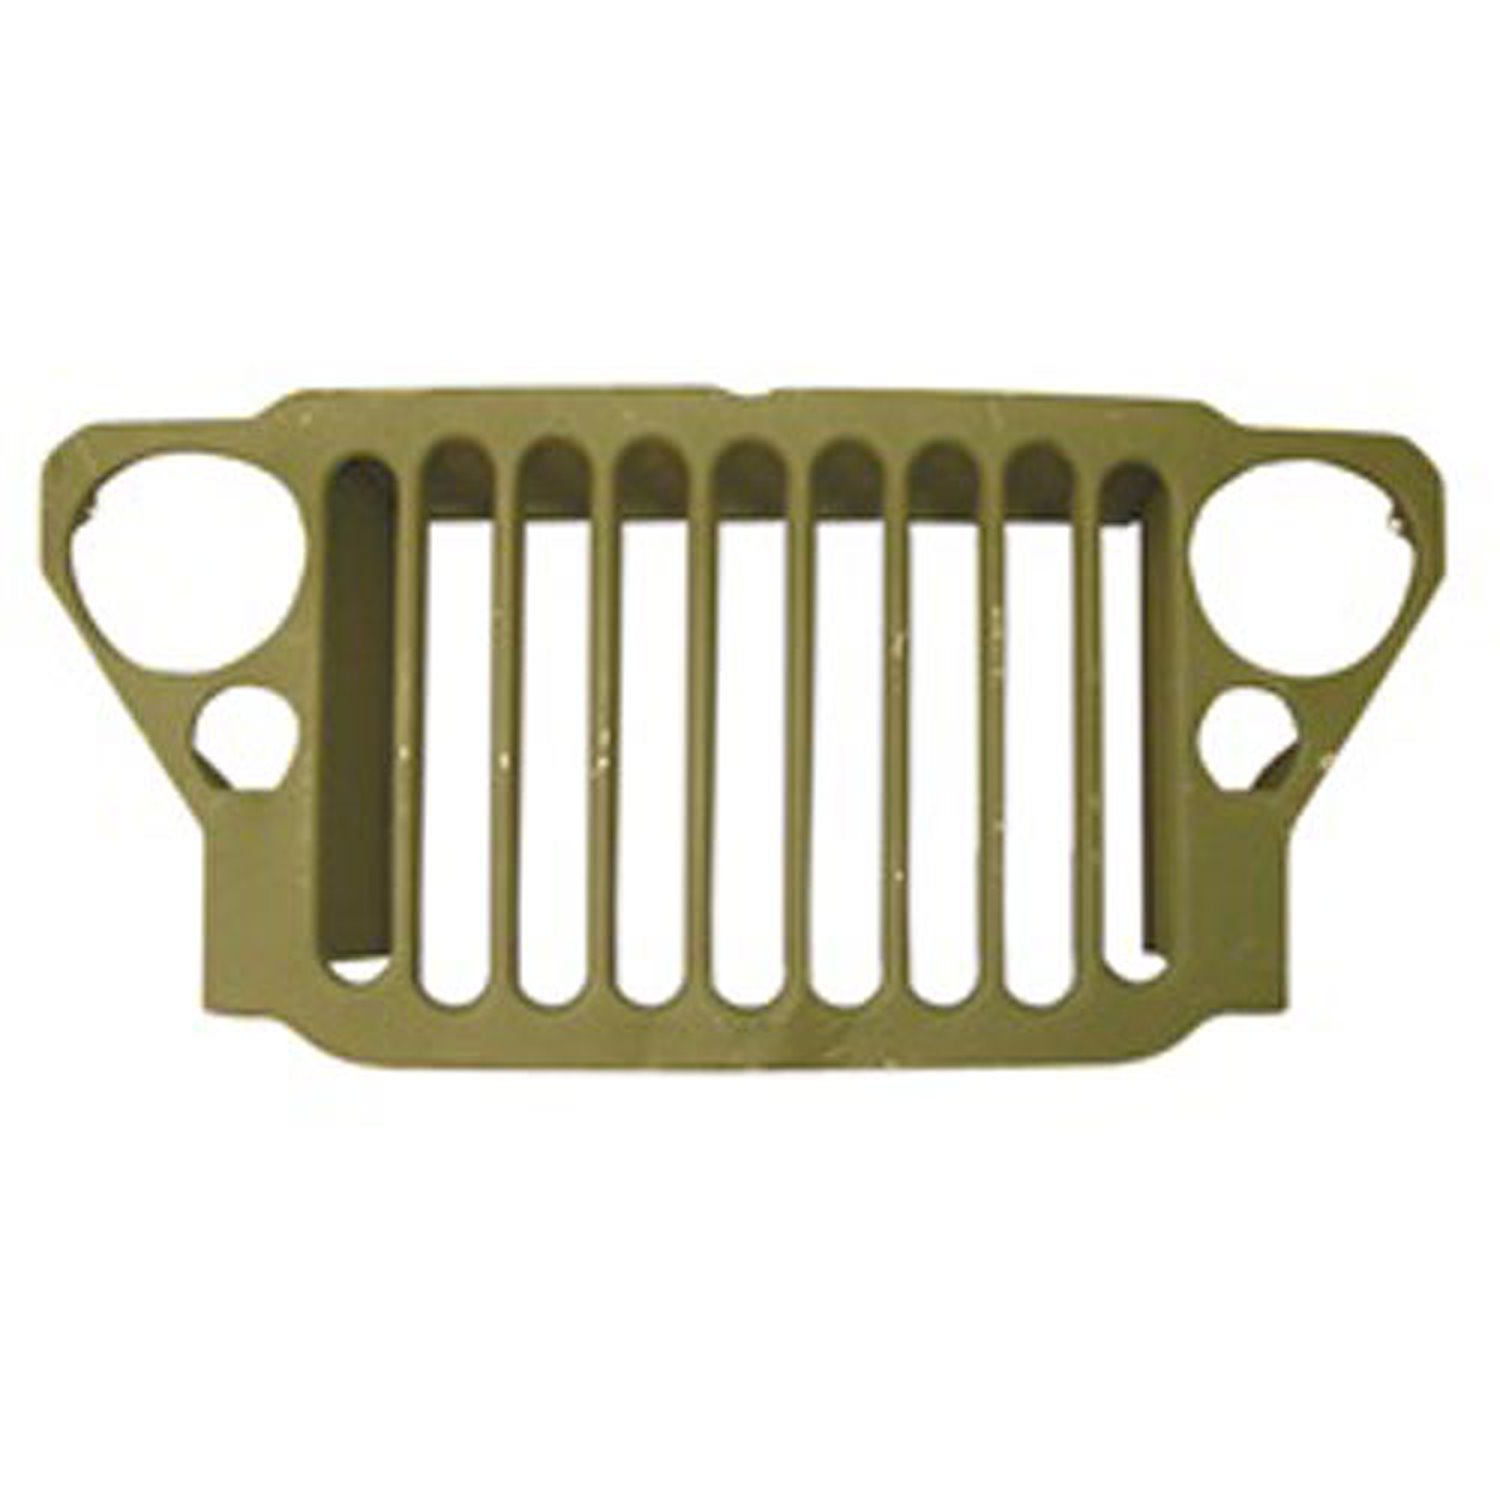 This reproduction stamped 9 slot grille from Omix-ADA